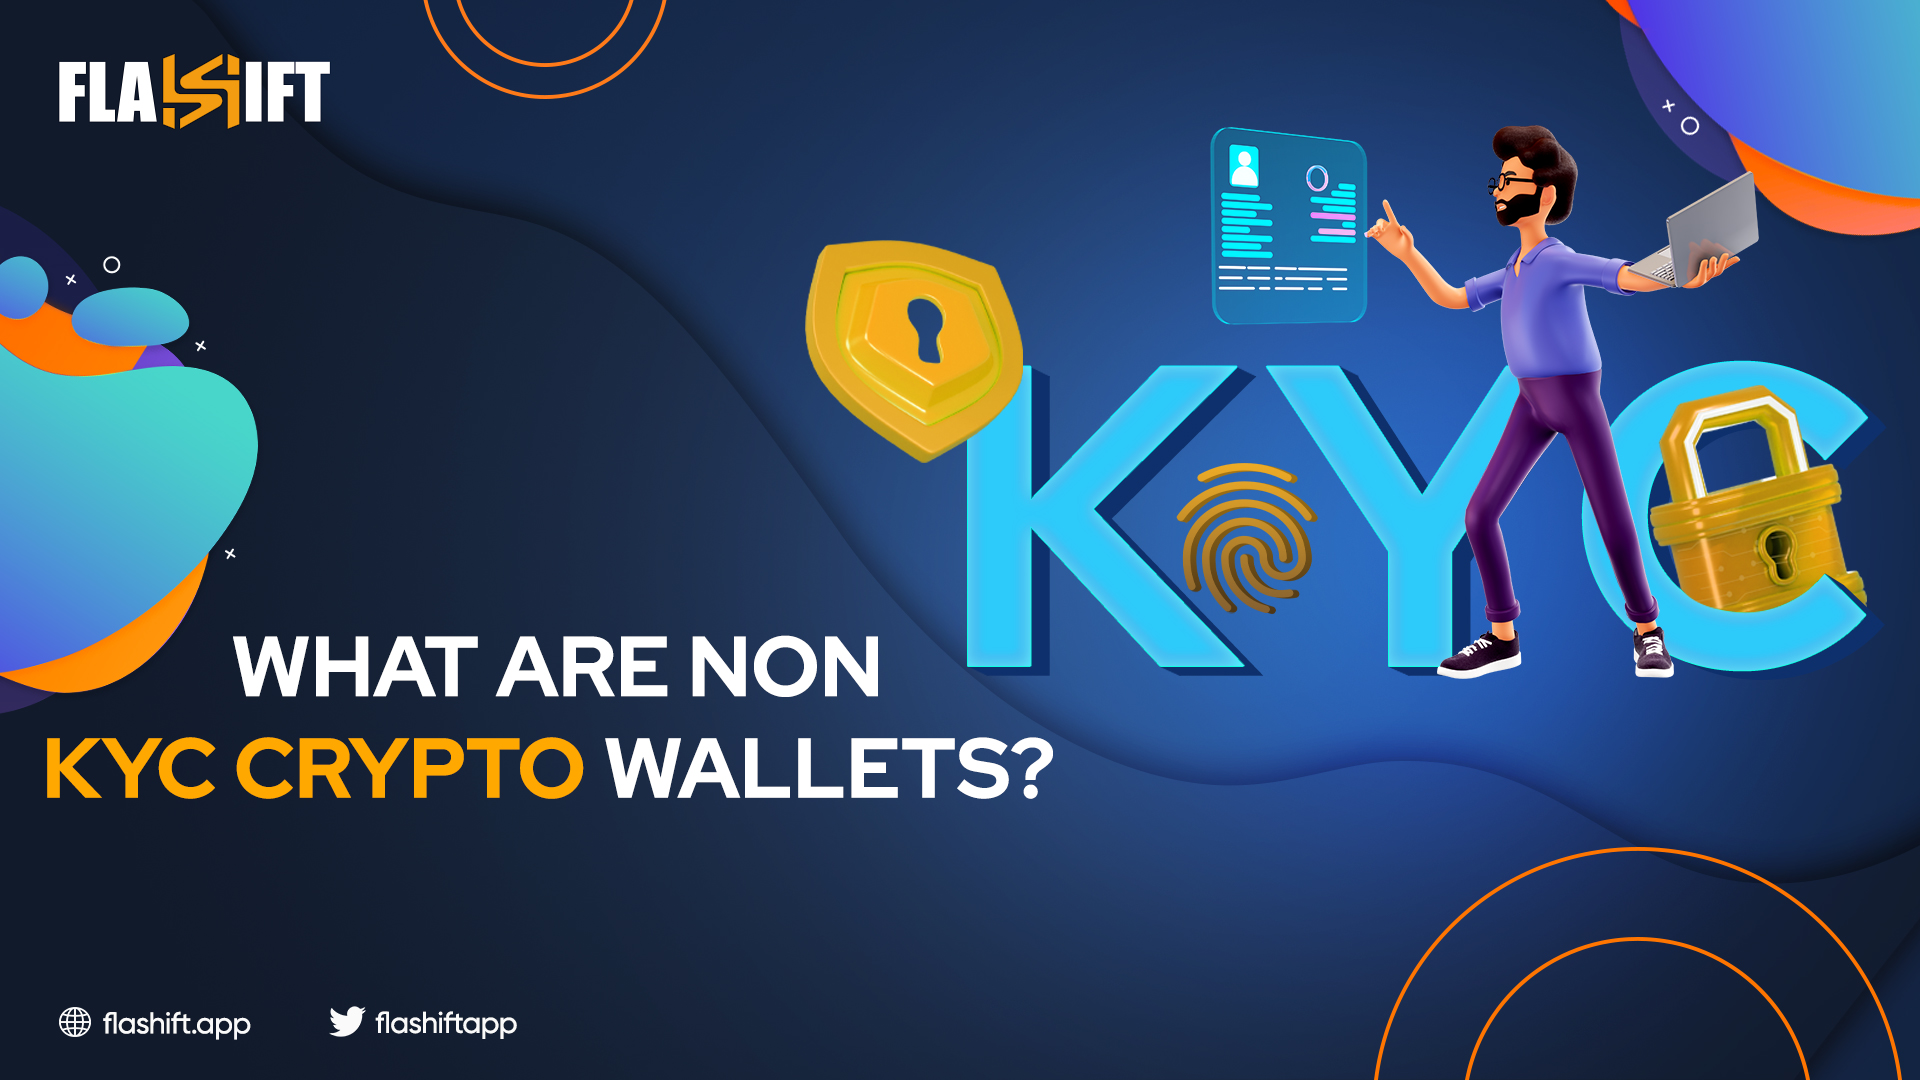 What are non KYC crypto wallets and how do they work?